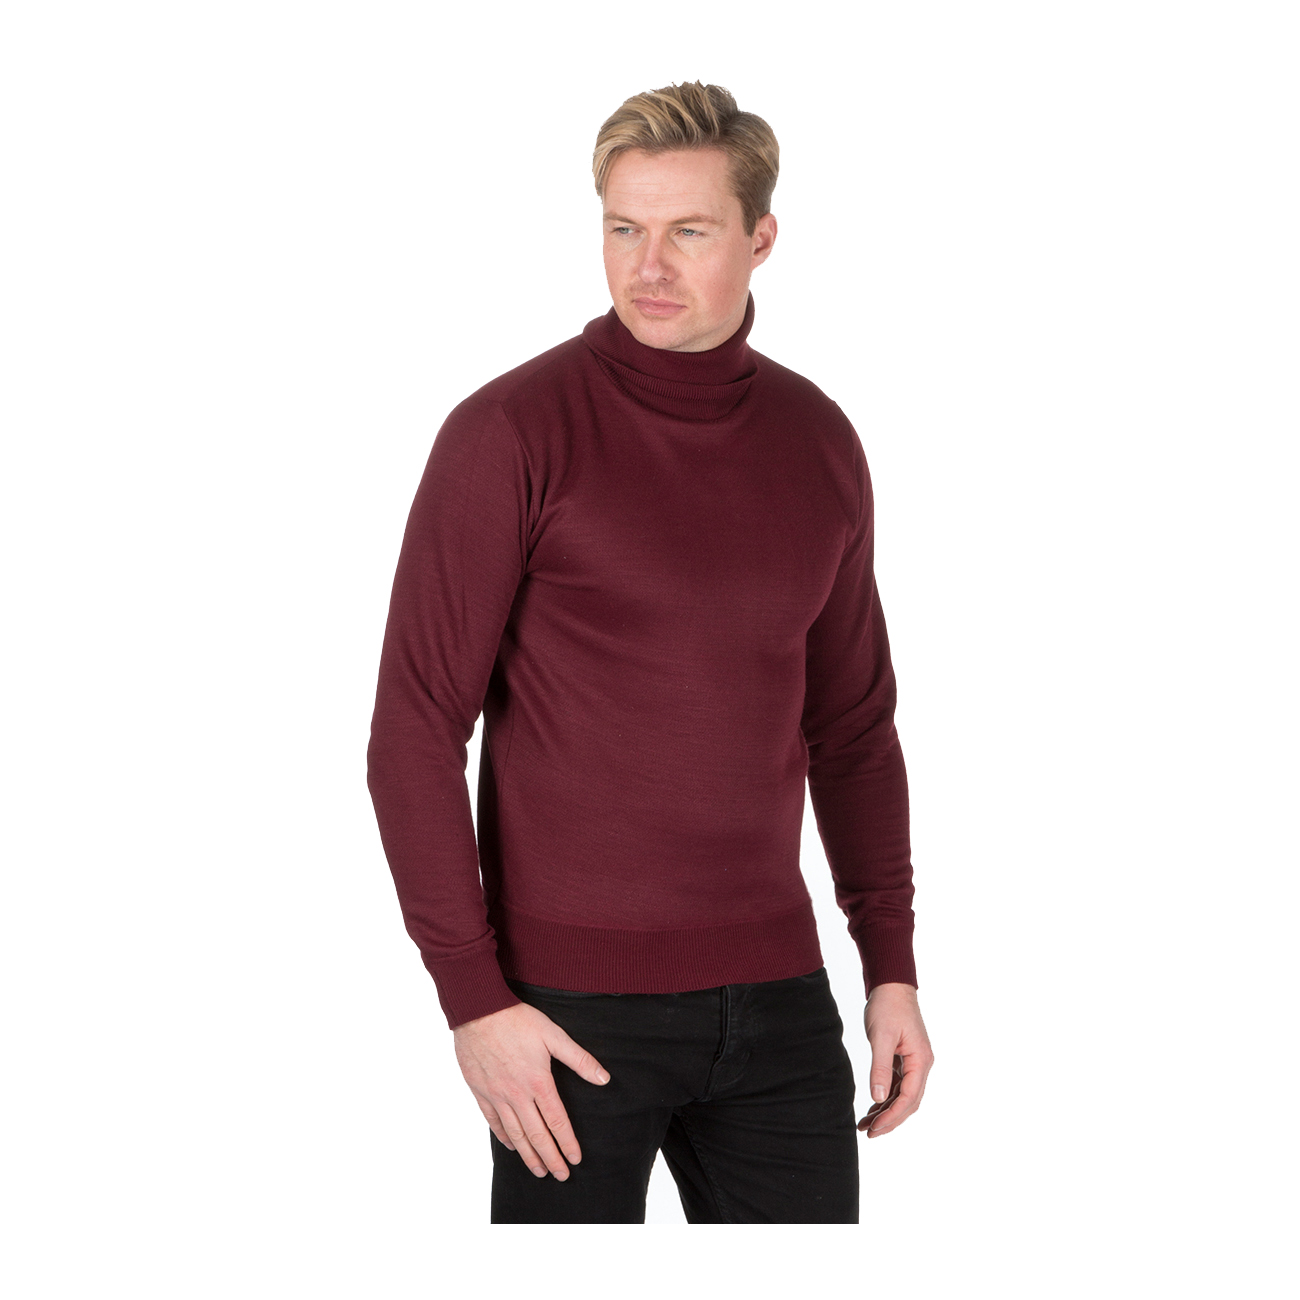 Mens Roll Neck Jumper Long Sleeve Sweater Plain Stretch Classic Casual ...